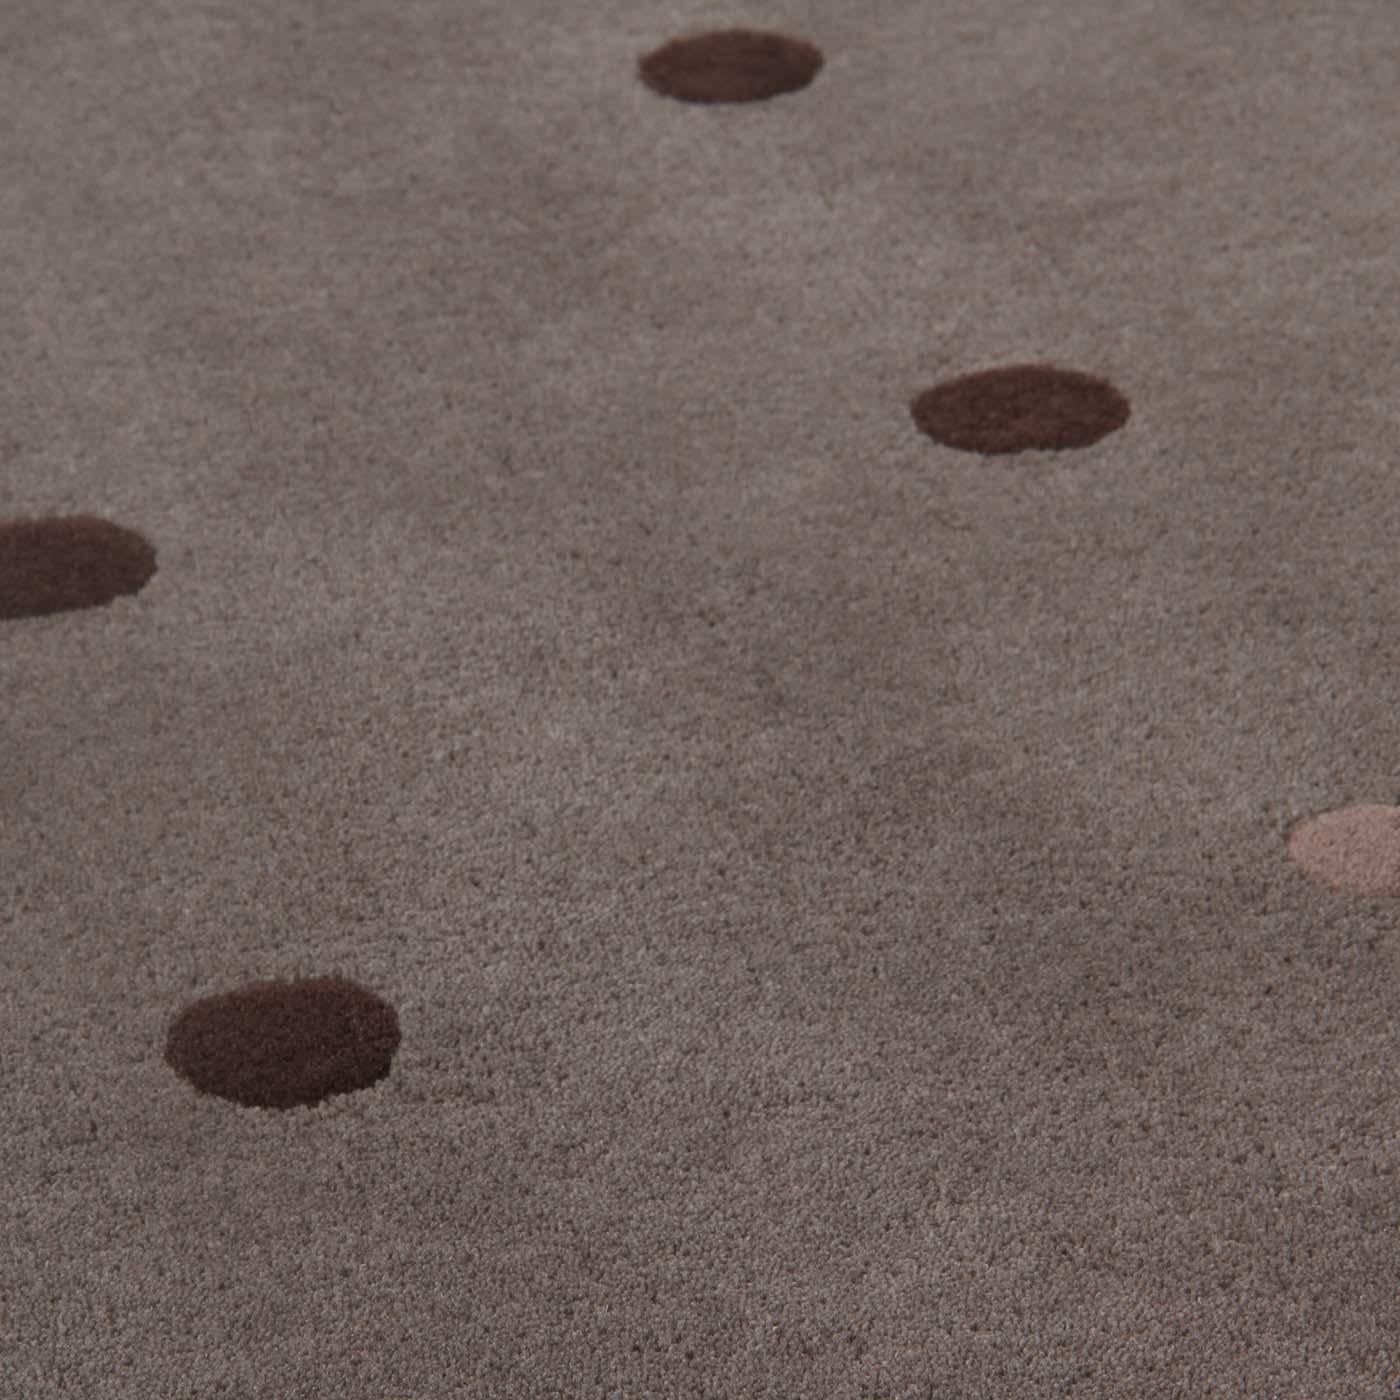 A fun and playful polka dot motif is featured on the bubbles carpet, a design by the modern and ingenious designer Joe Colombo. Bubbles was born from the 1968 graphic design project that Joe Colombo undertook, like the Bolle table lamp in 1964. The